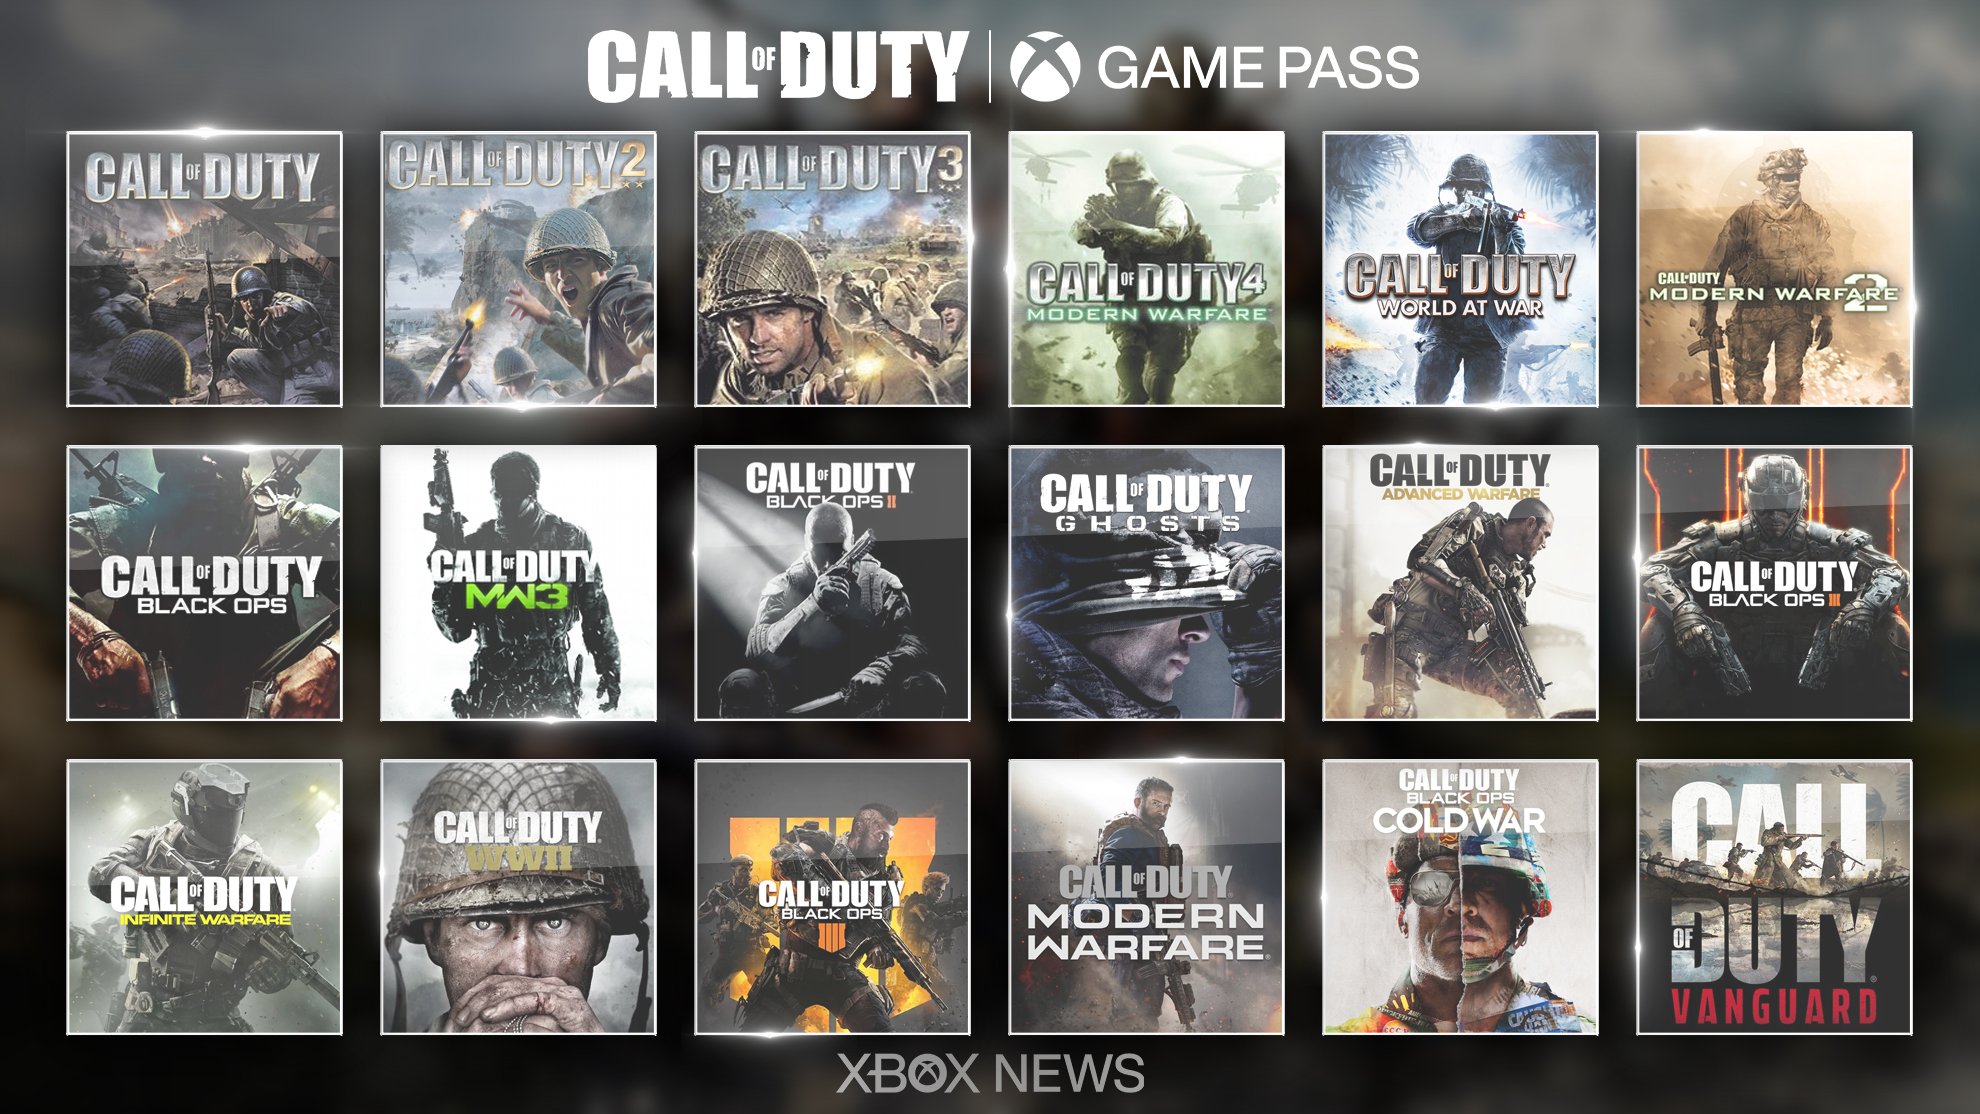 The Activision-Blizzard games that could hit Game Pass once the